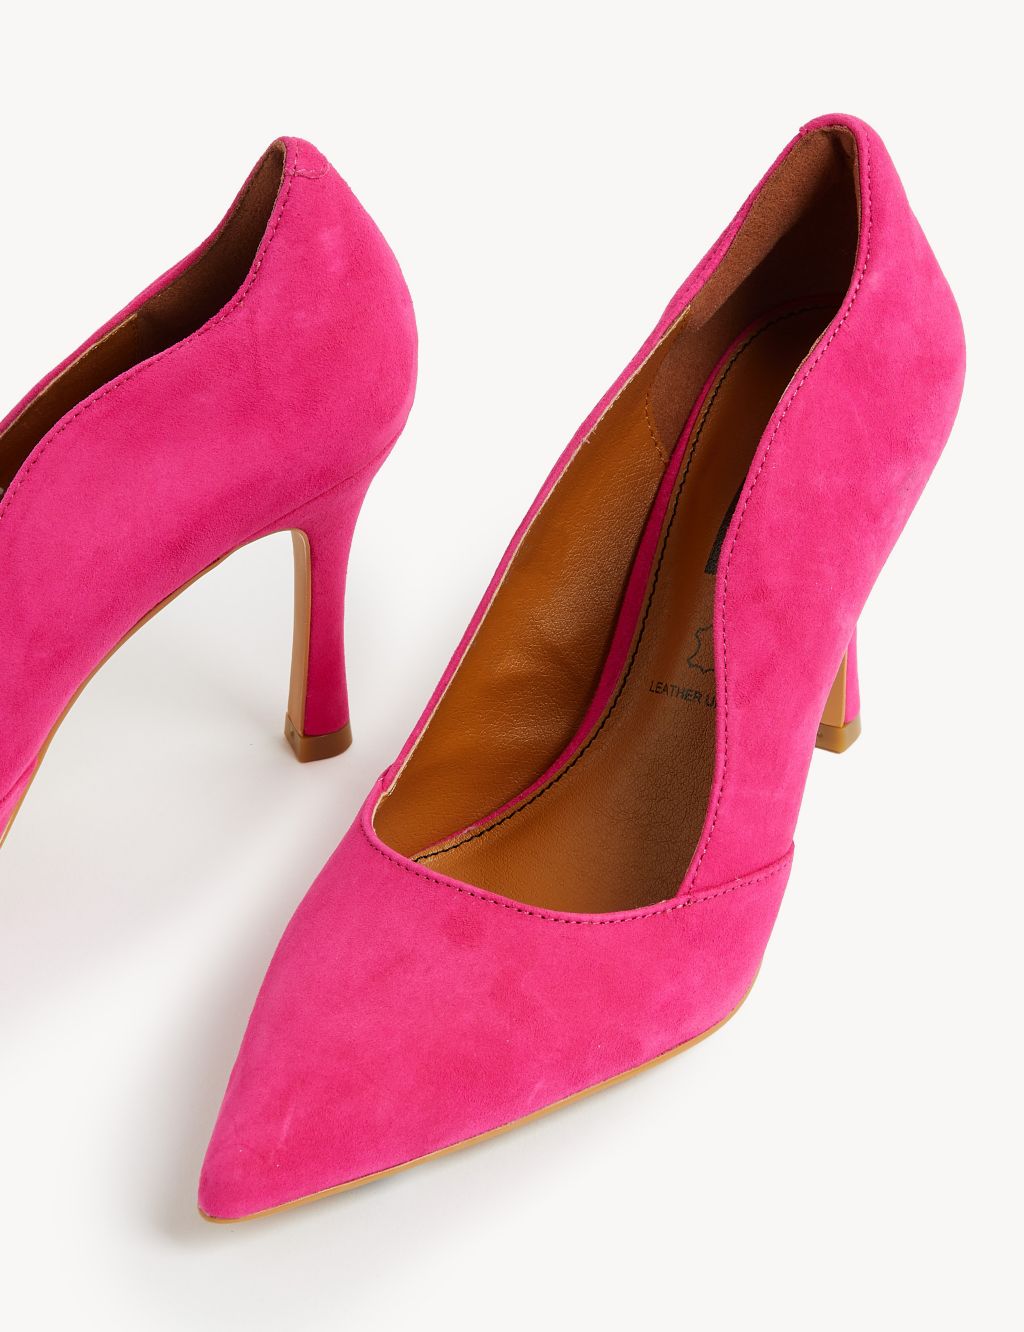 Suede Stiletto Heel Pointed Court Shoes image 2